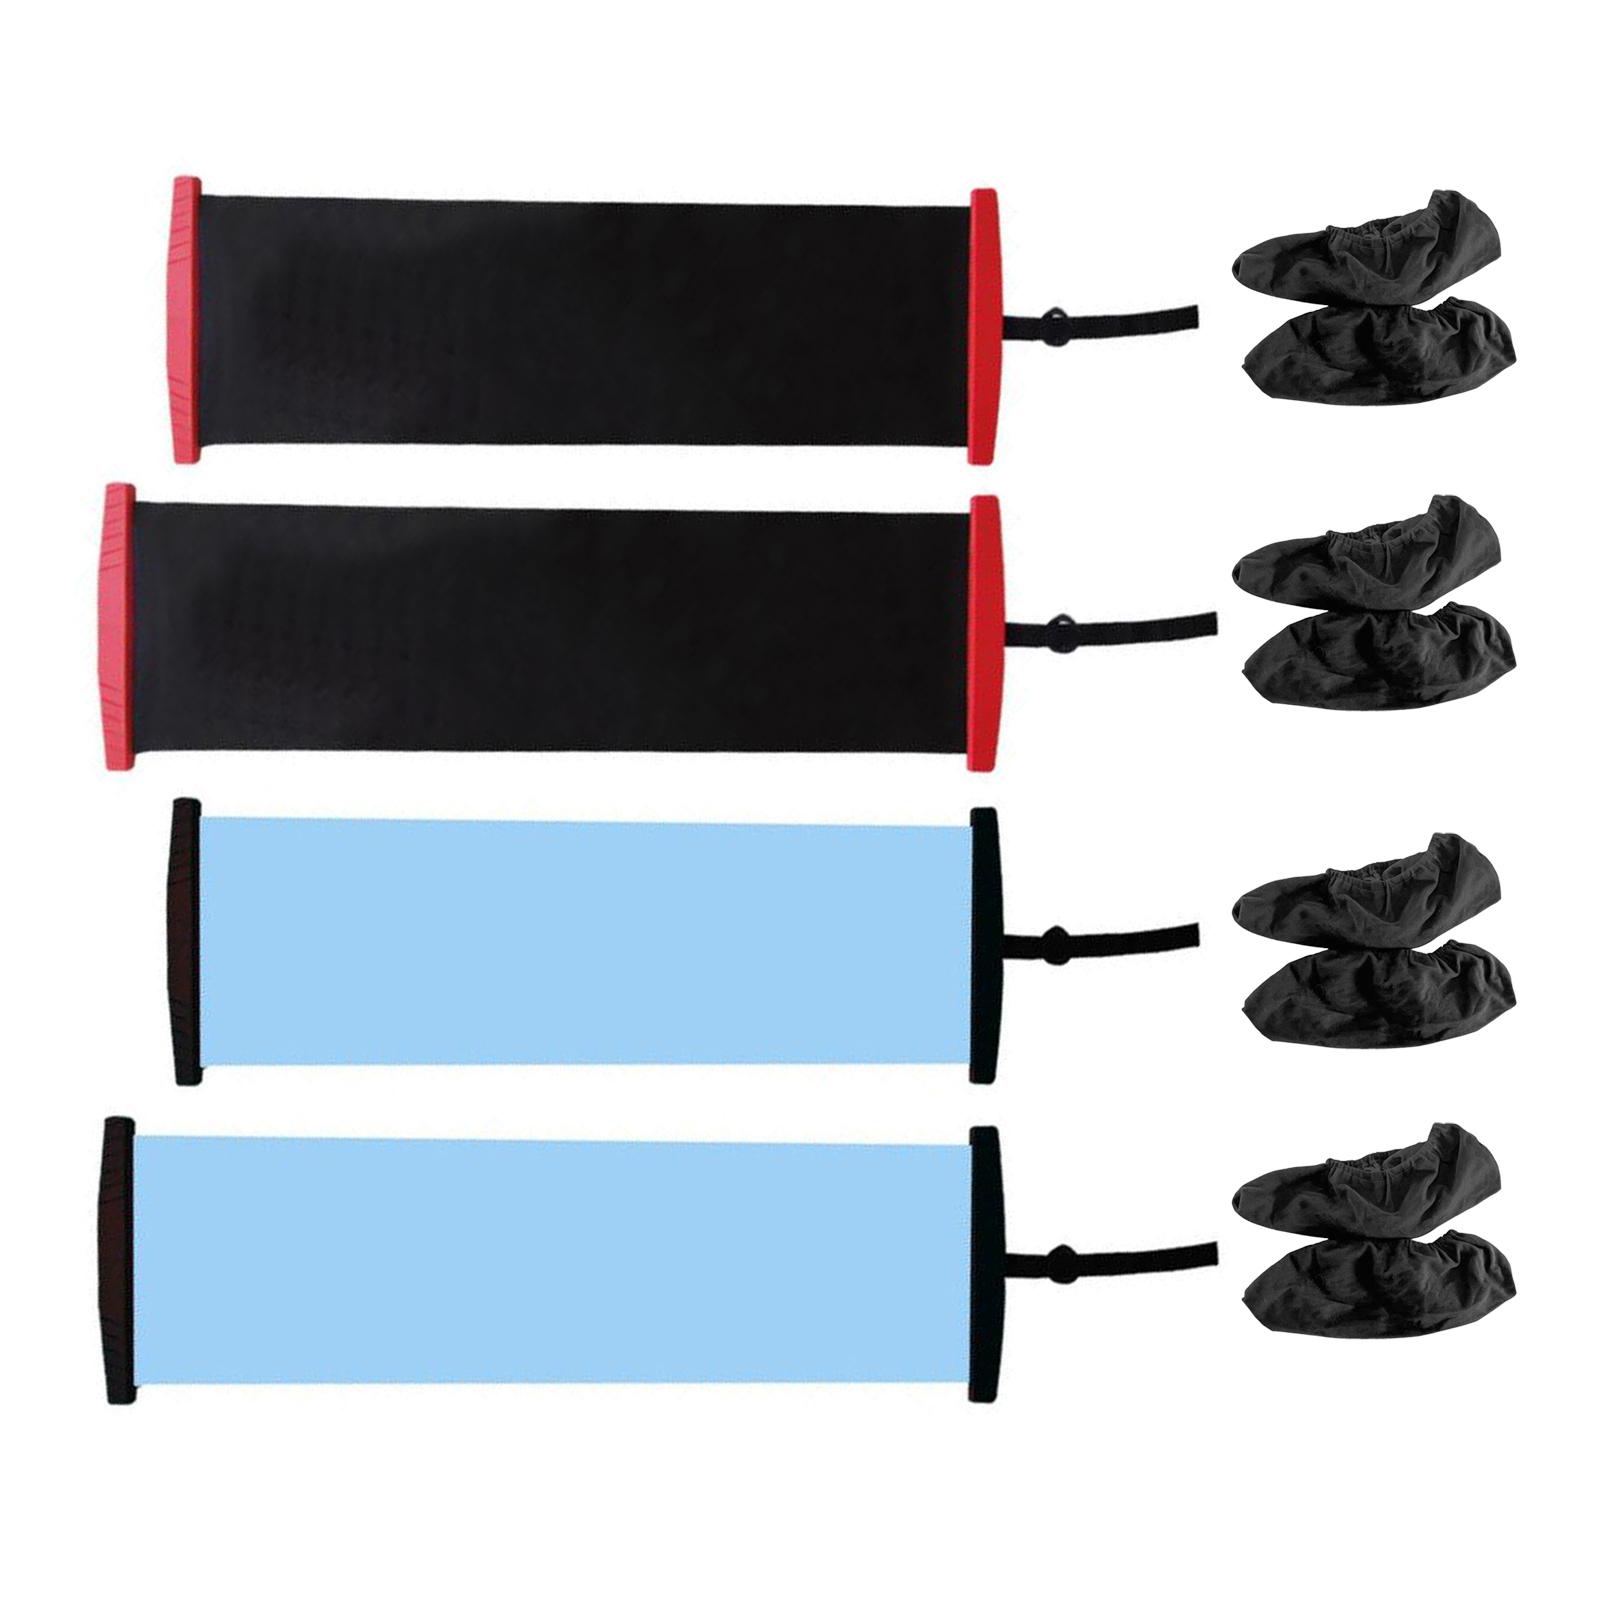 Slide Board Sliders For Working Out, Workout Board For Fitness Training